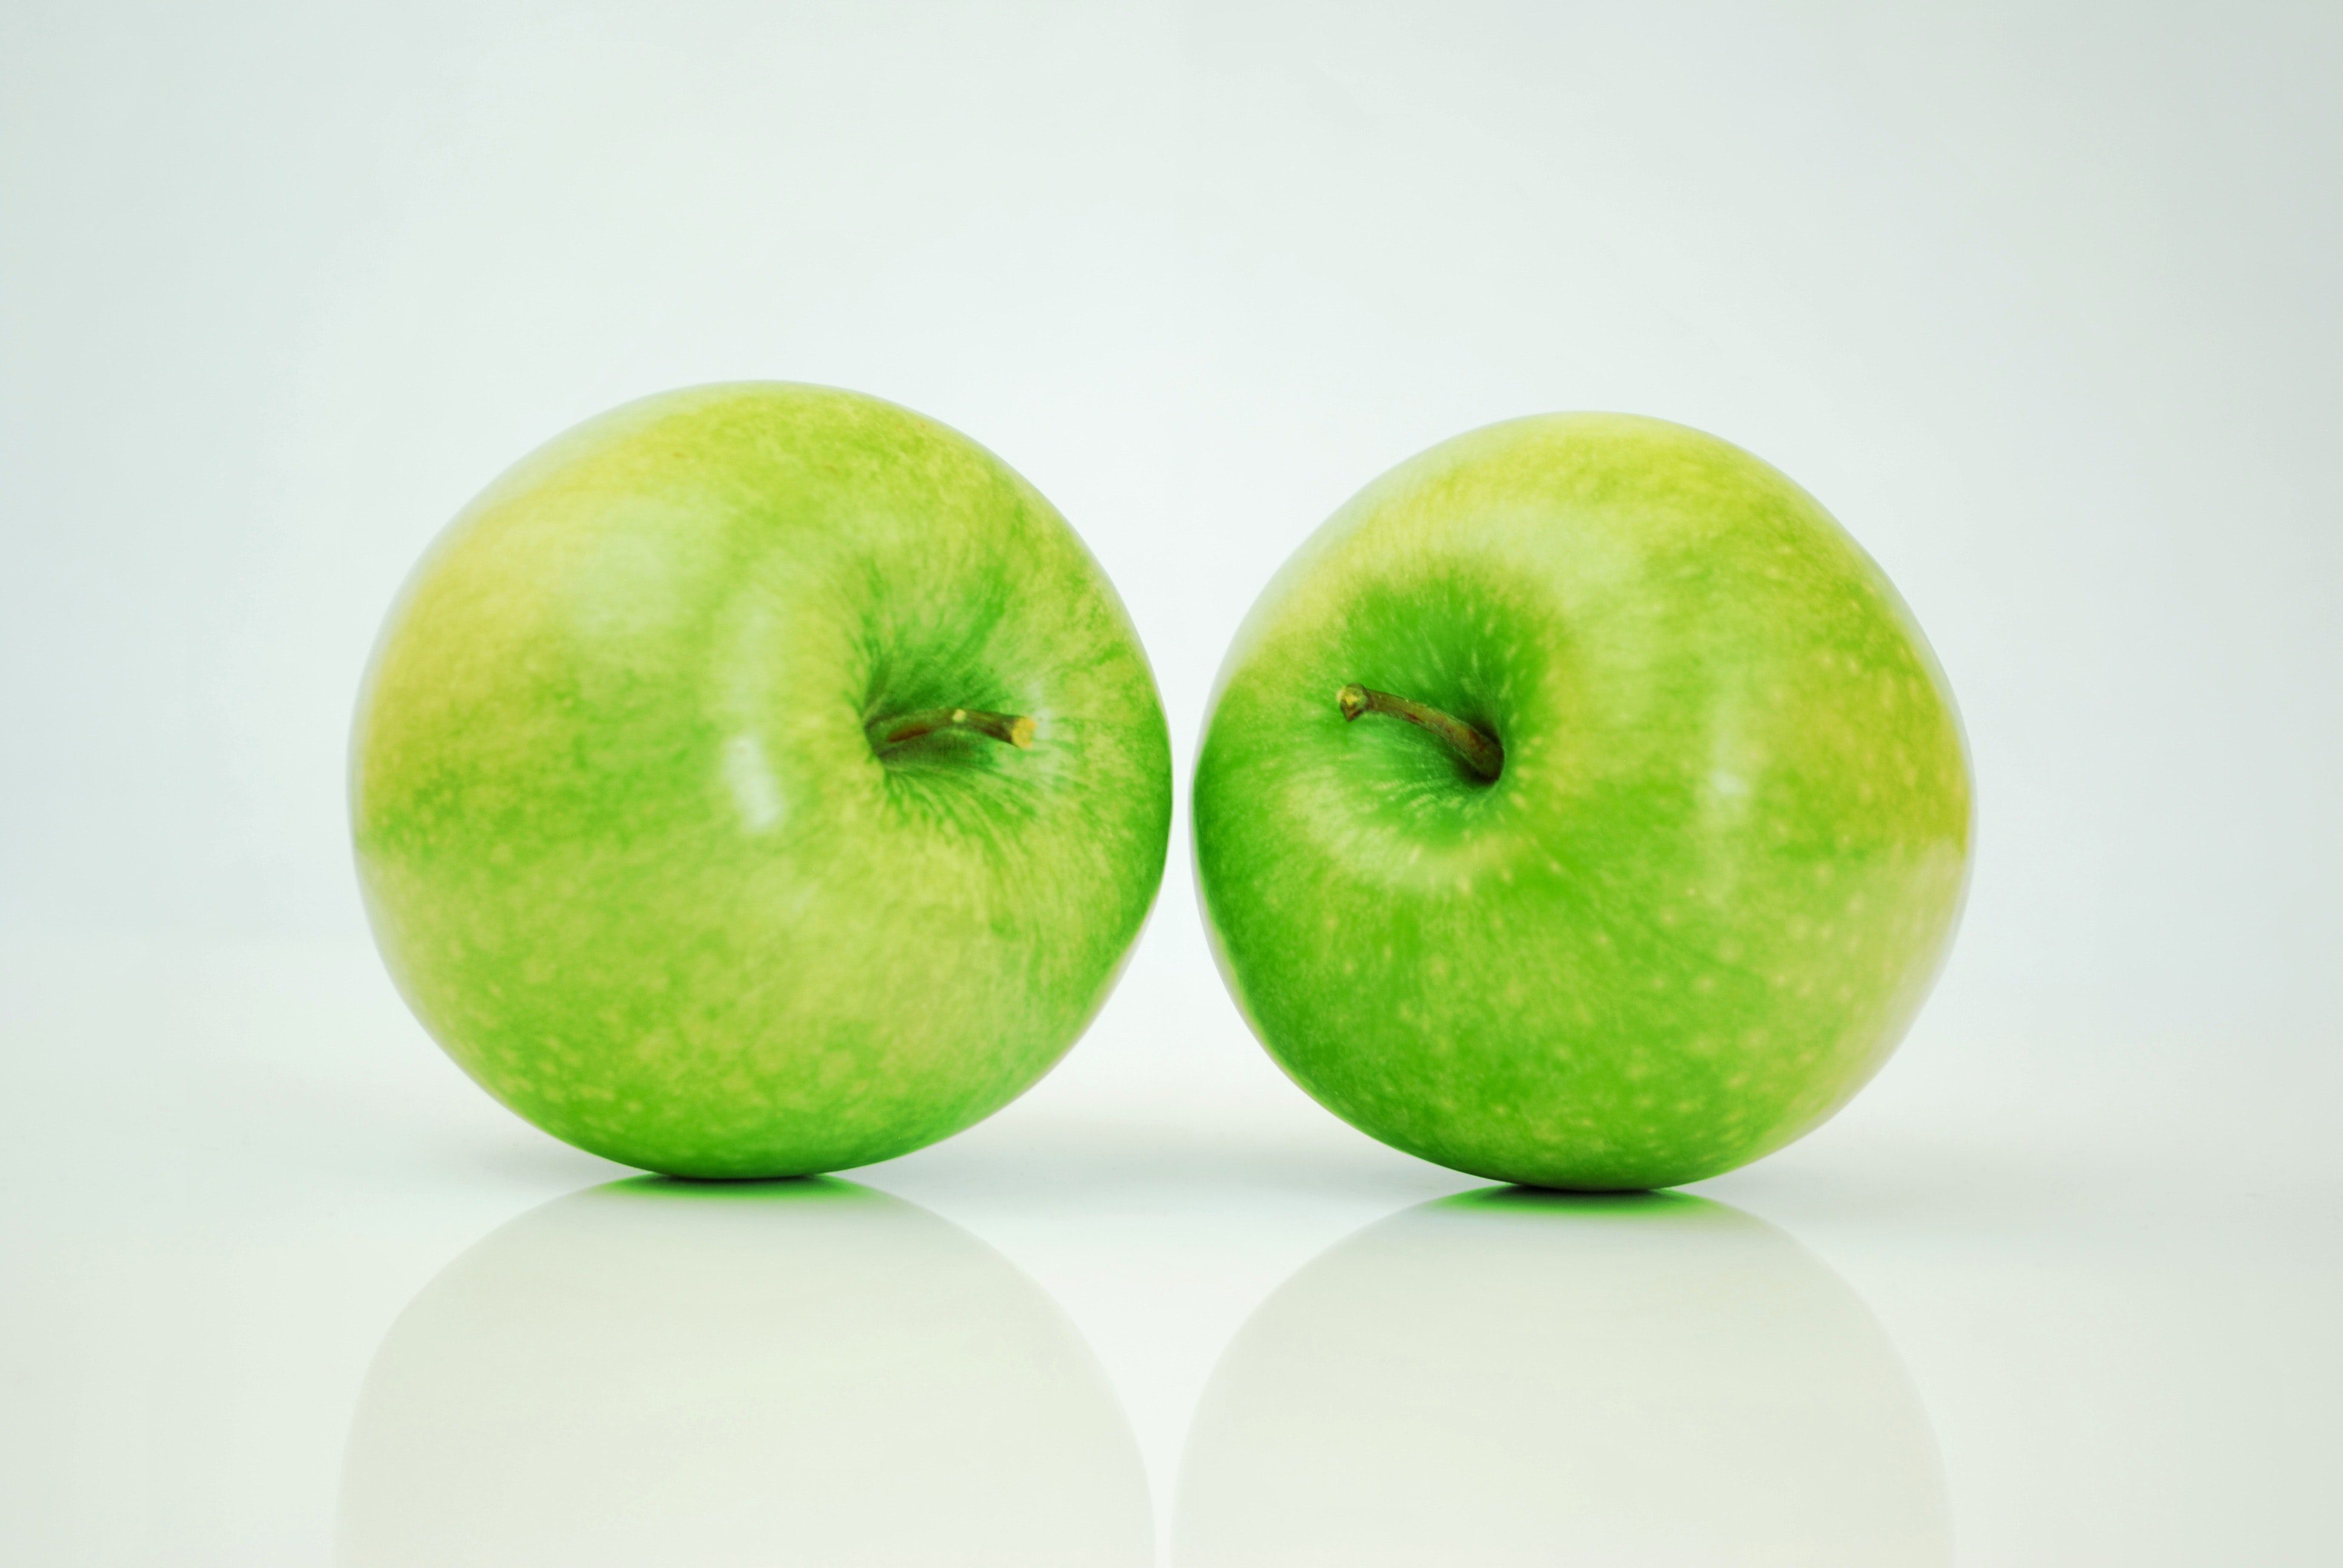 negotiating av prices by comparing apples to apples